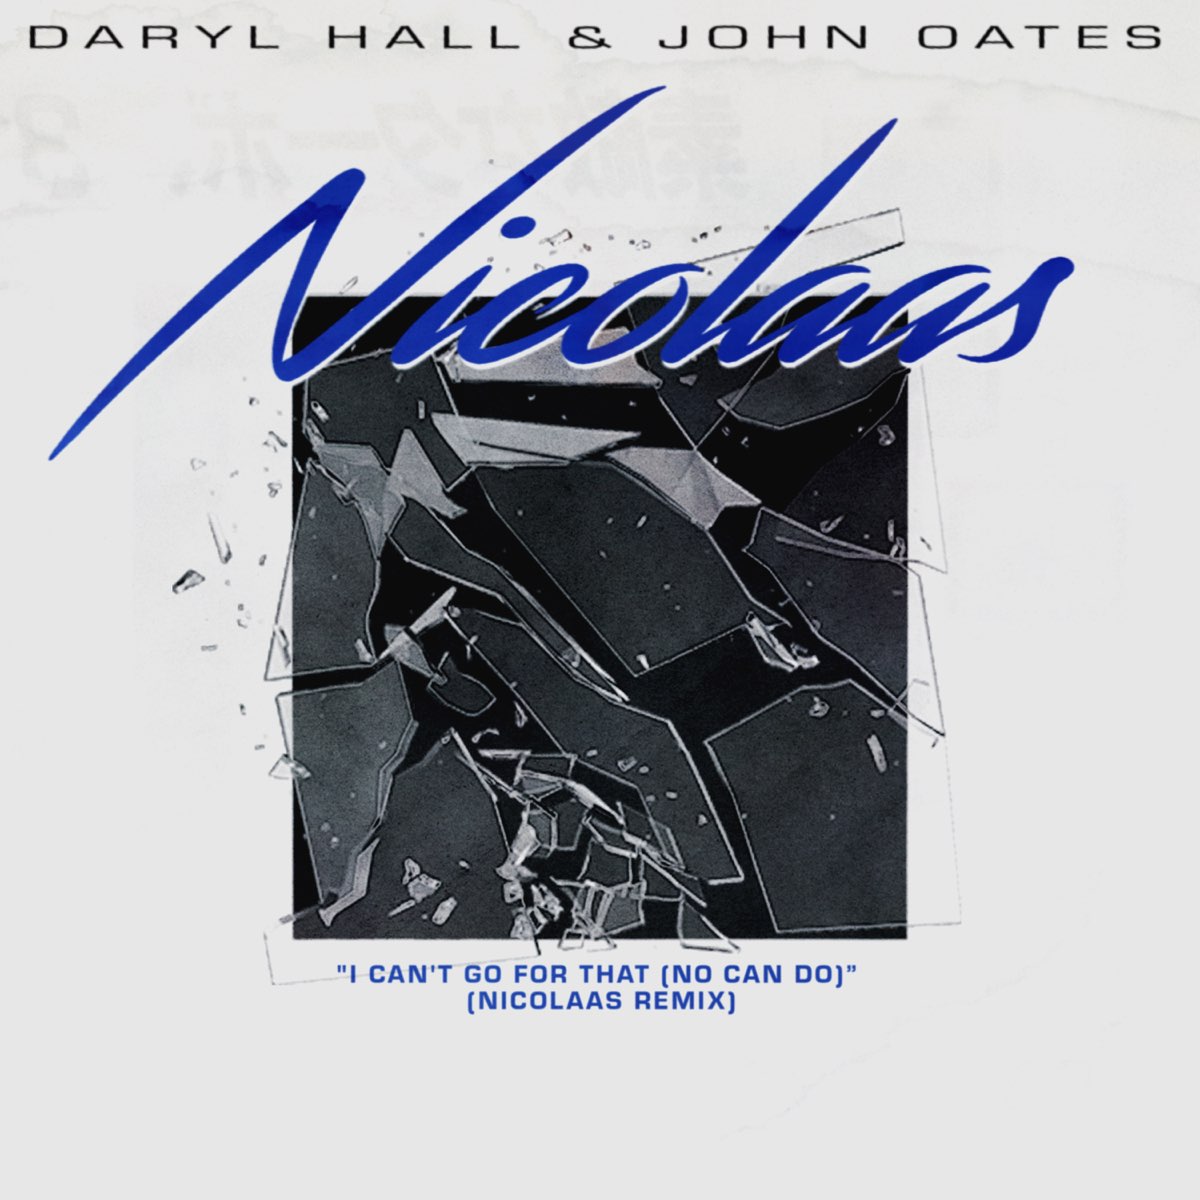 I Can't Go for That (No Can Do) [Nicolaas Remix] - Single by Daryl Hall & John  Oates & NICOLAAS on Apple Music